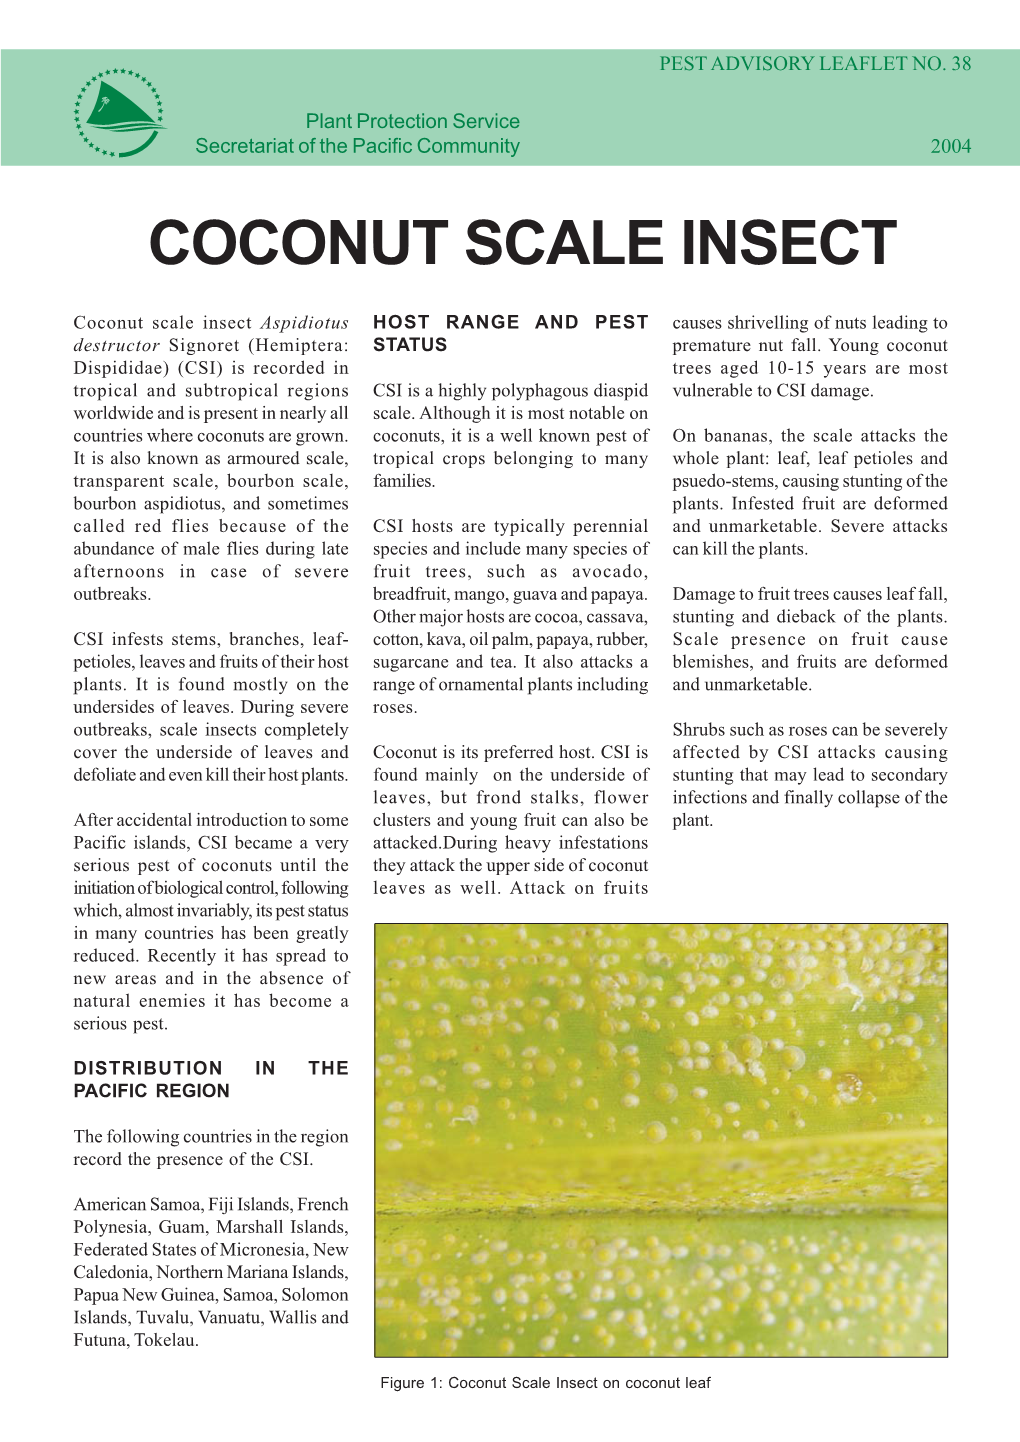 Coconut Scale Insect